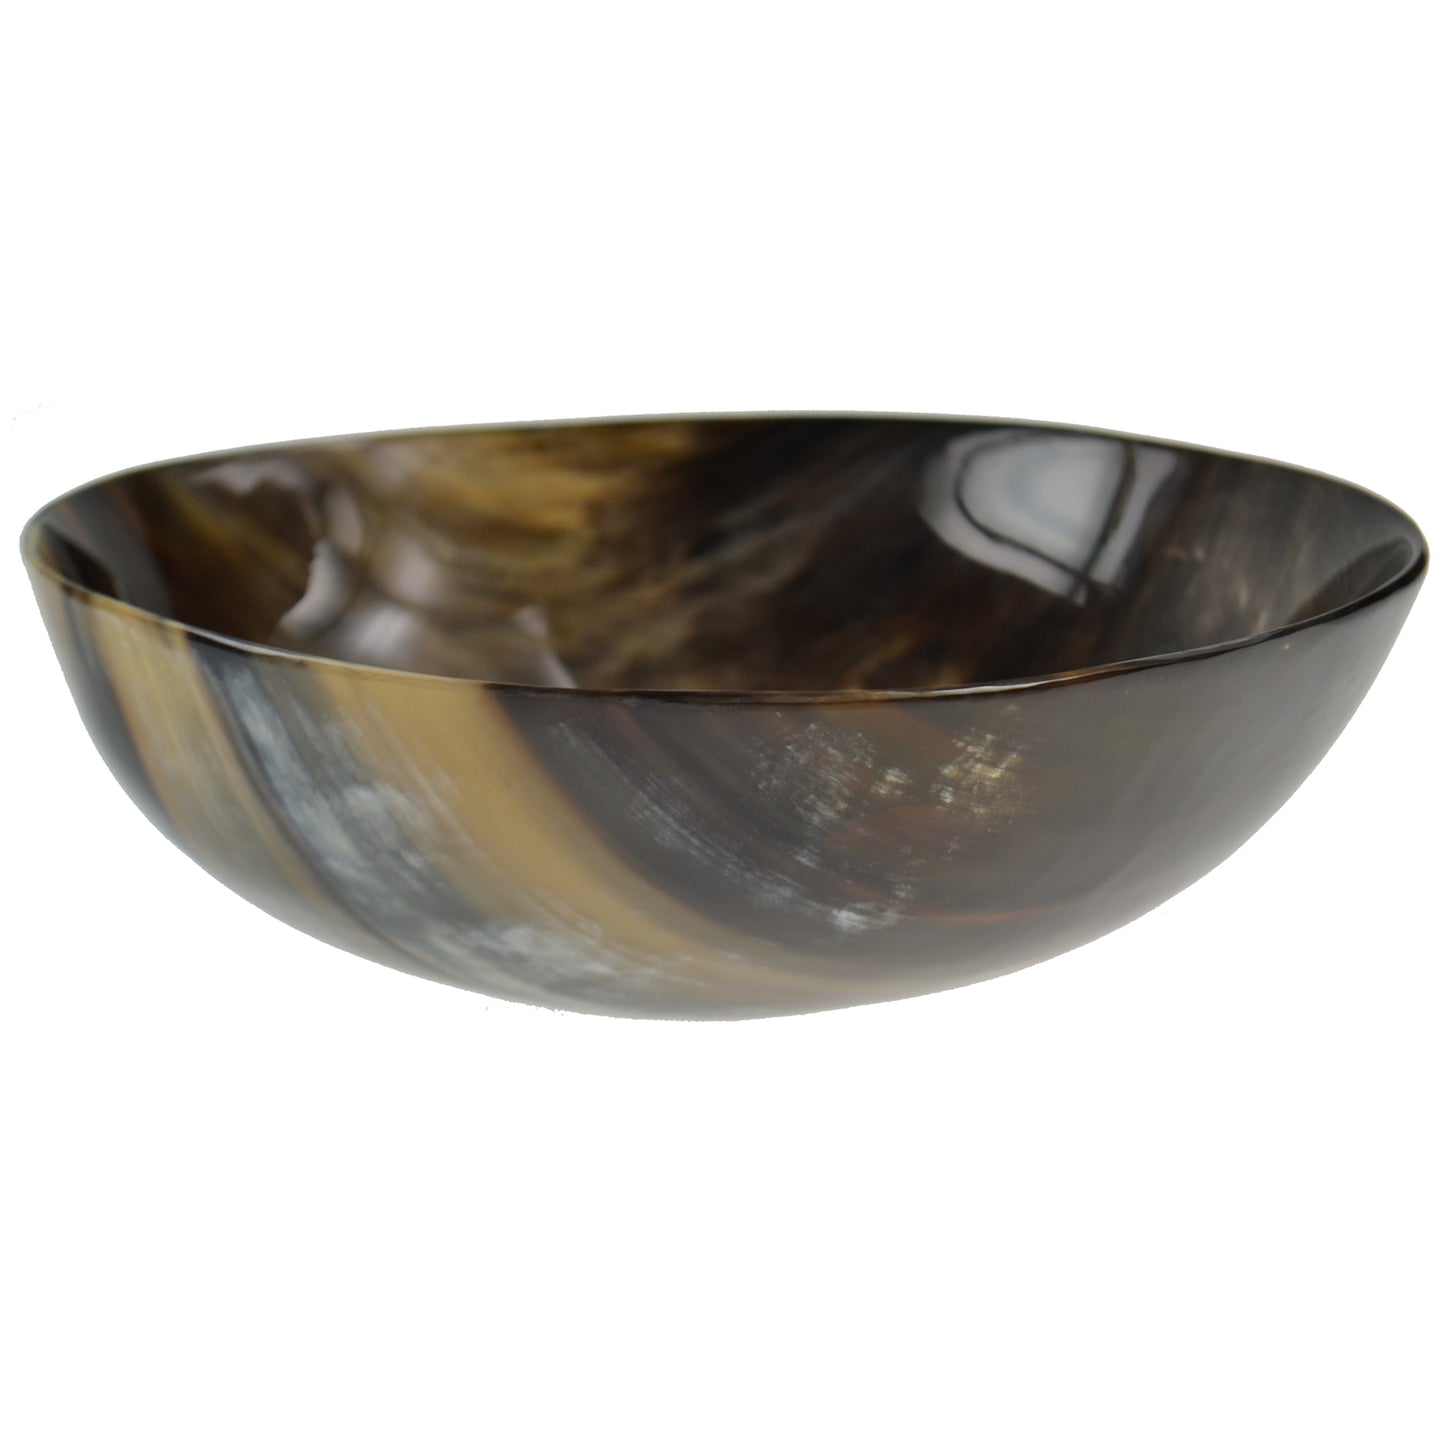 Real horn bowl - Size Large (8")